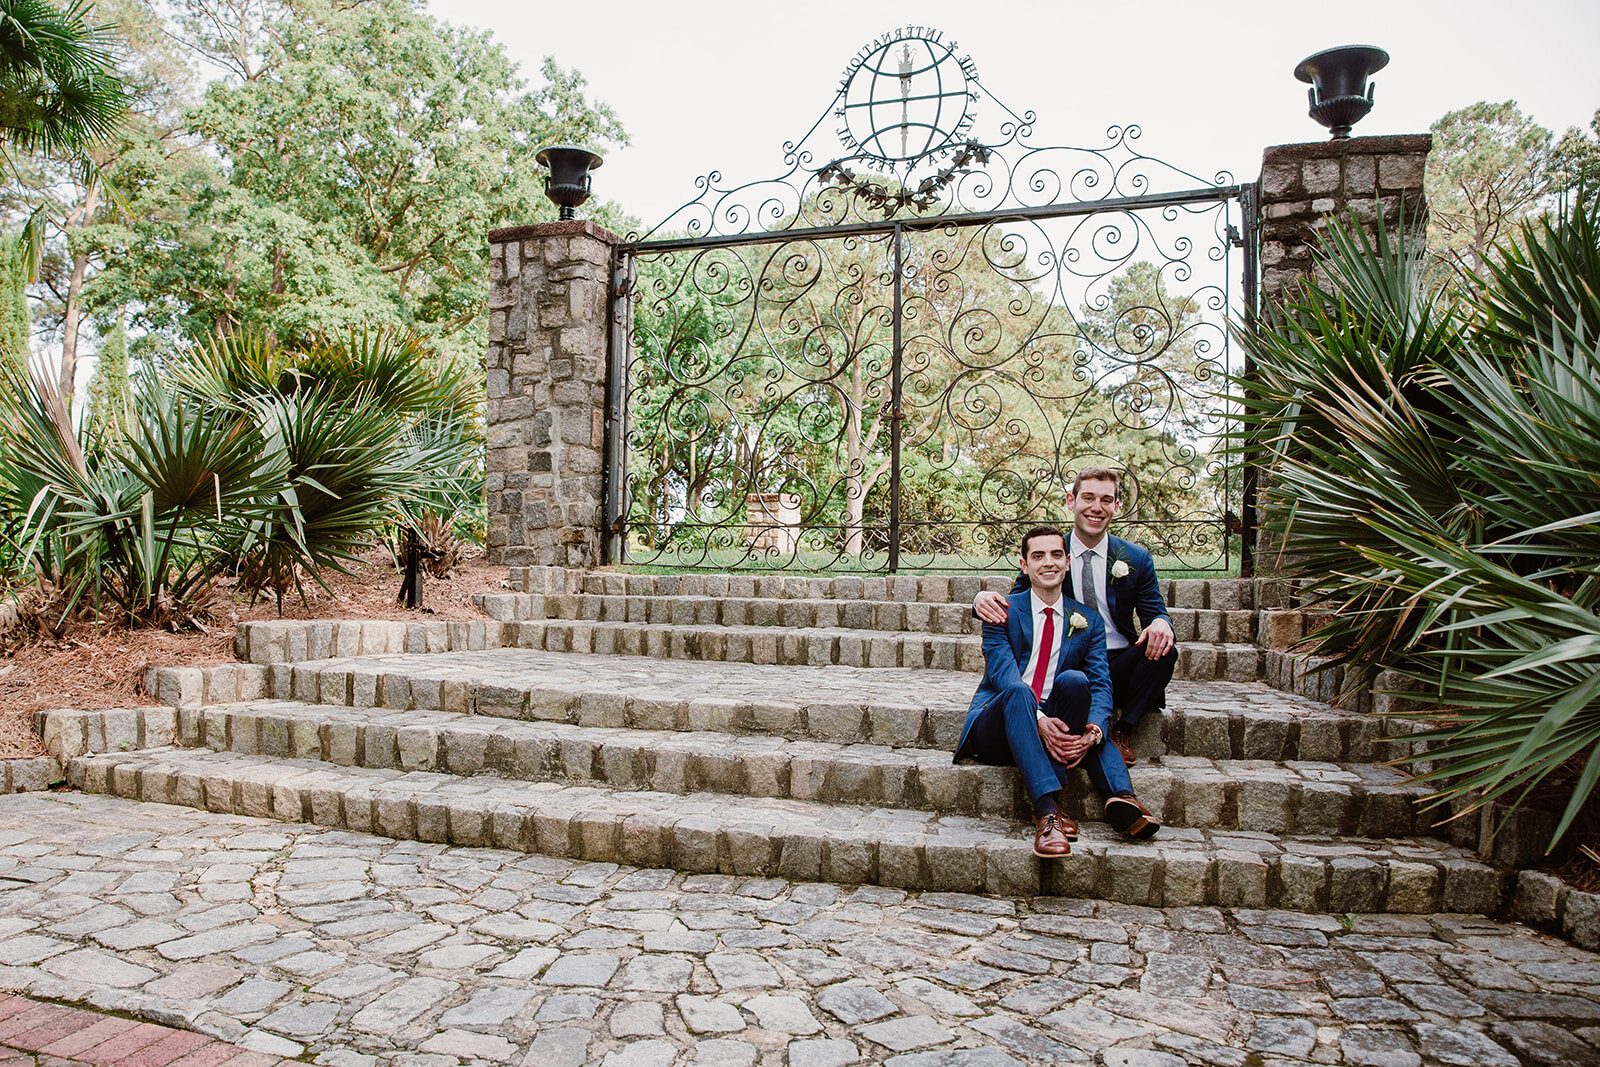  Portraits of the grooms. Vegan wedding at the Norfolk Botanical Gardens, Norfolk, VA. Rose garden and plant inspired wedding on the first day of Pride month. Sarah Mattozzi Photography. 